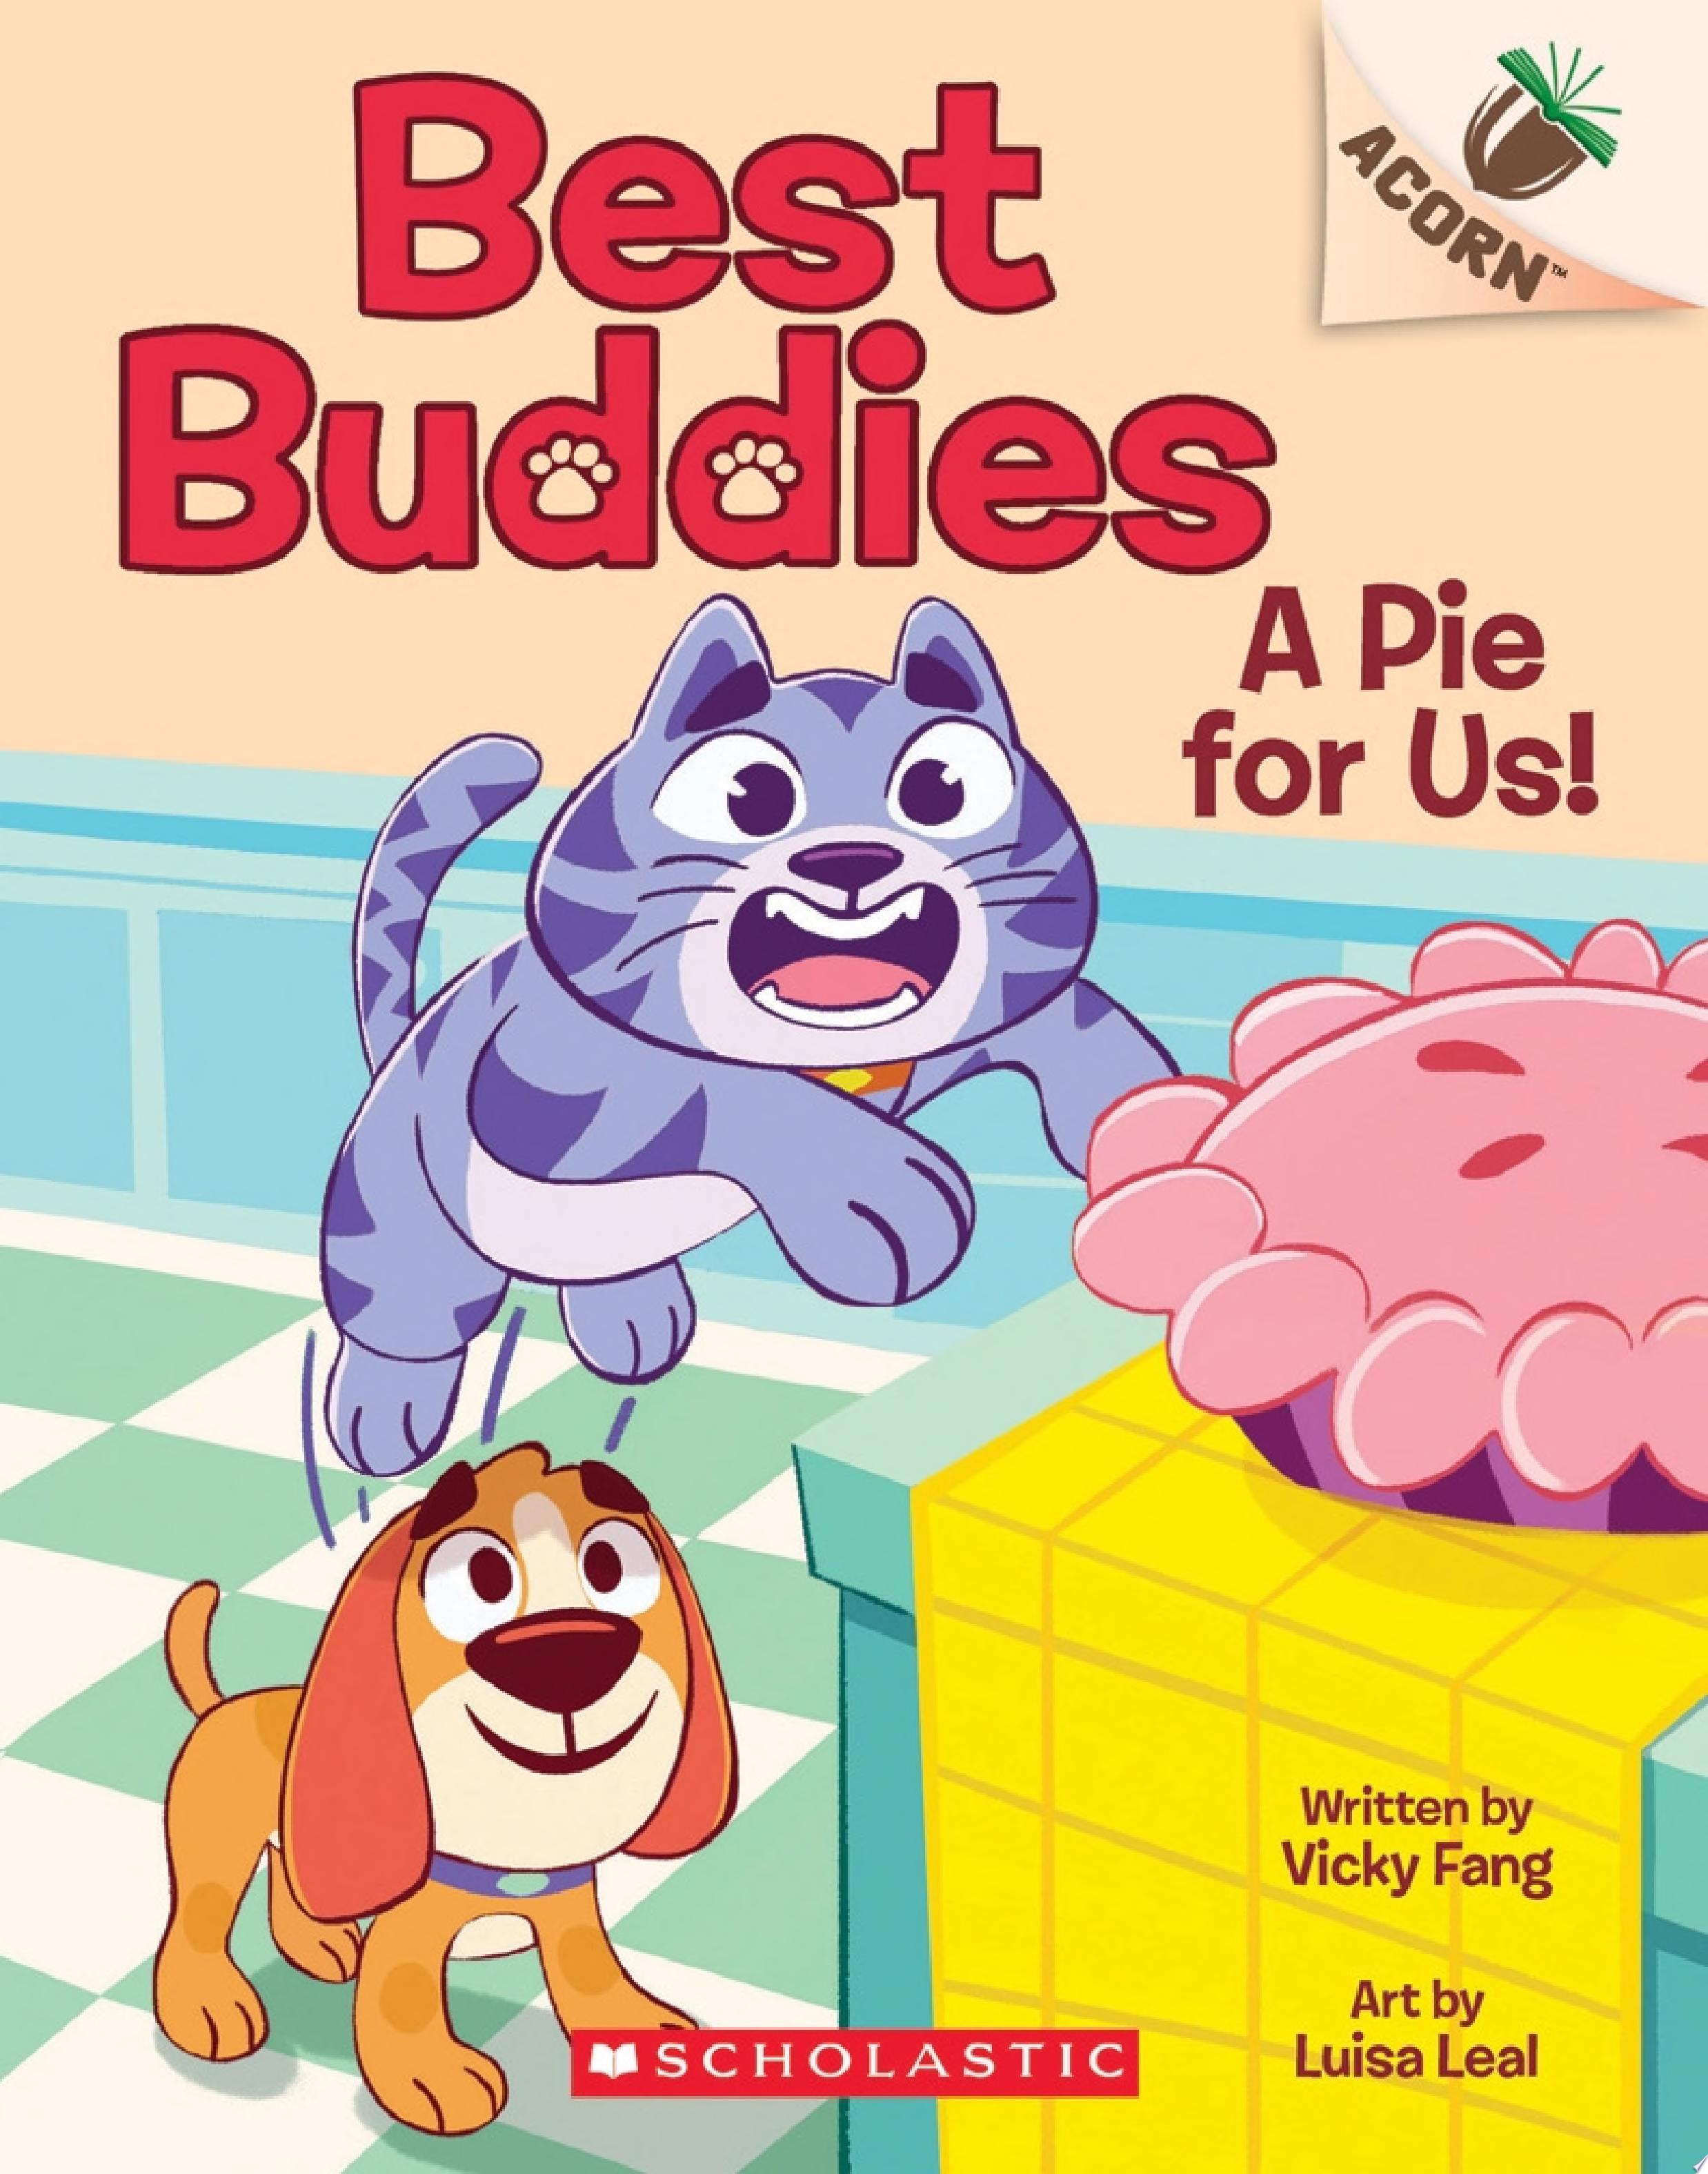 Image for "A Pie for Us!: An Acorn Book (Best Buddies #1)"